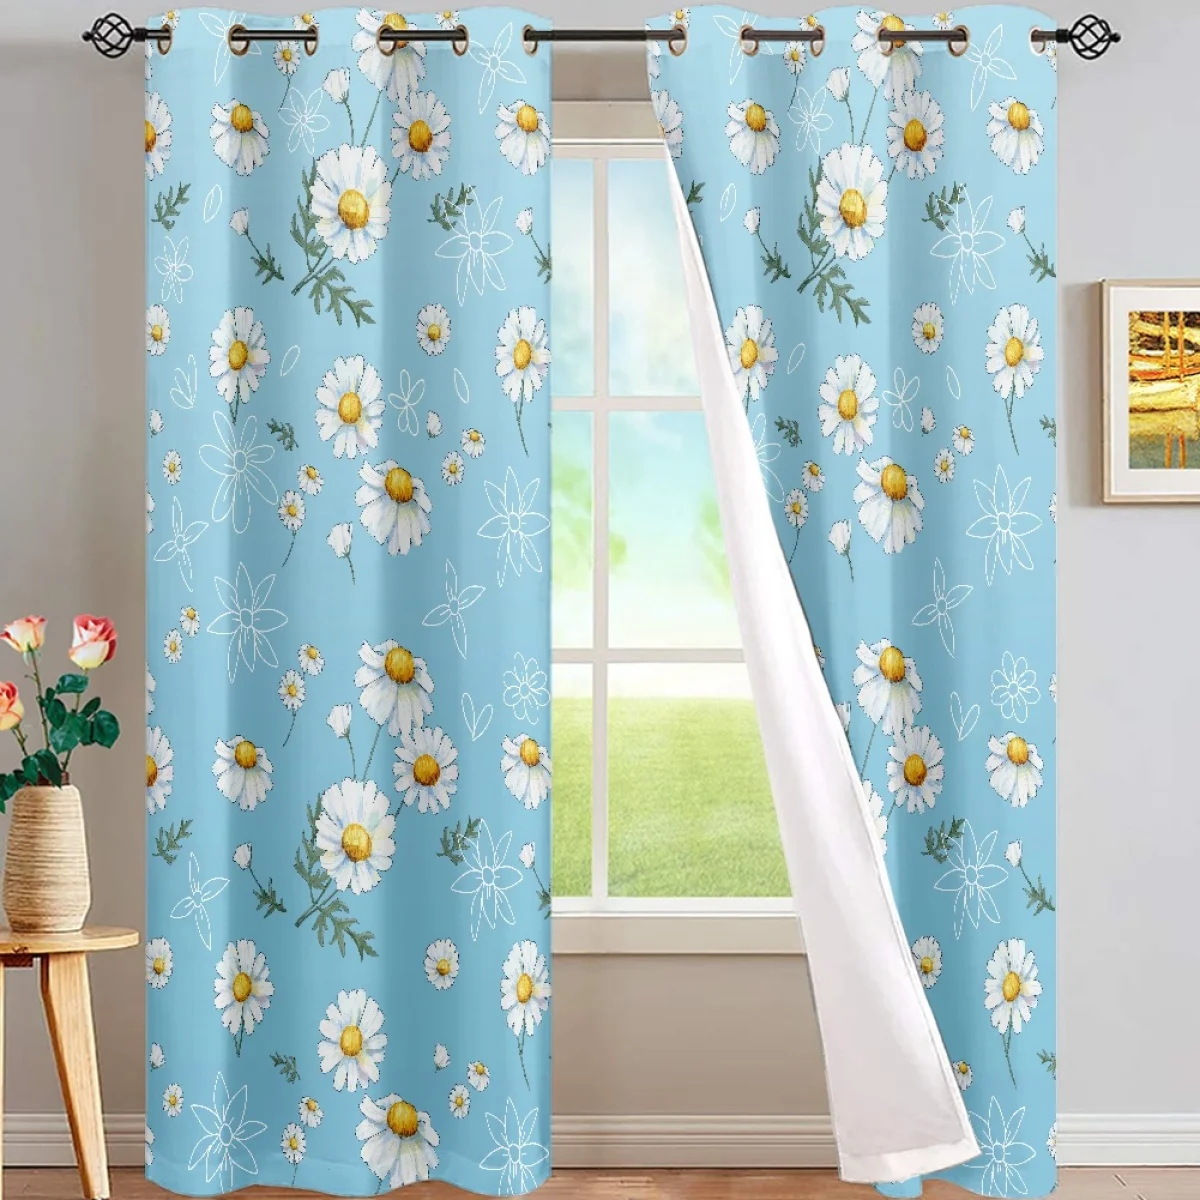 

Daisy Flower Soft And Skin-friendly Exquisite Pattern Drapes Semi-shading Insulation Hotel Living Room Polyester Fabric Curtains